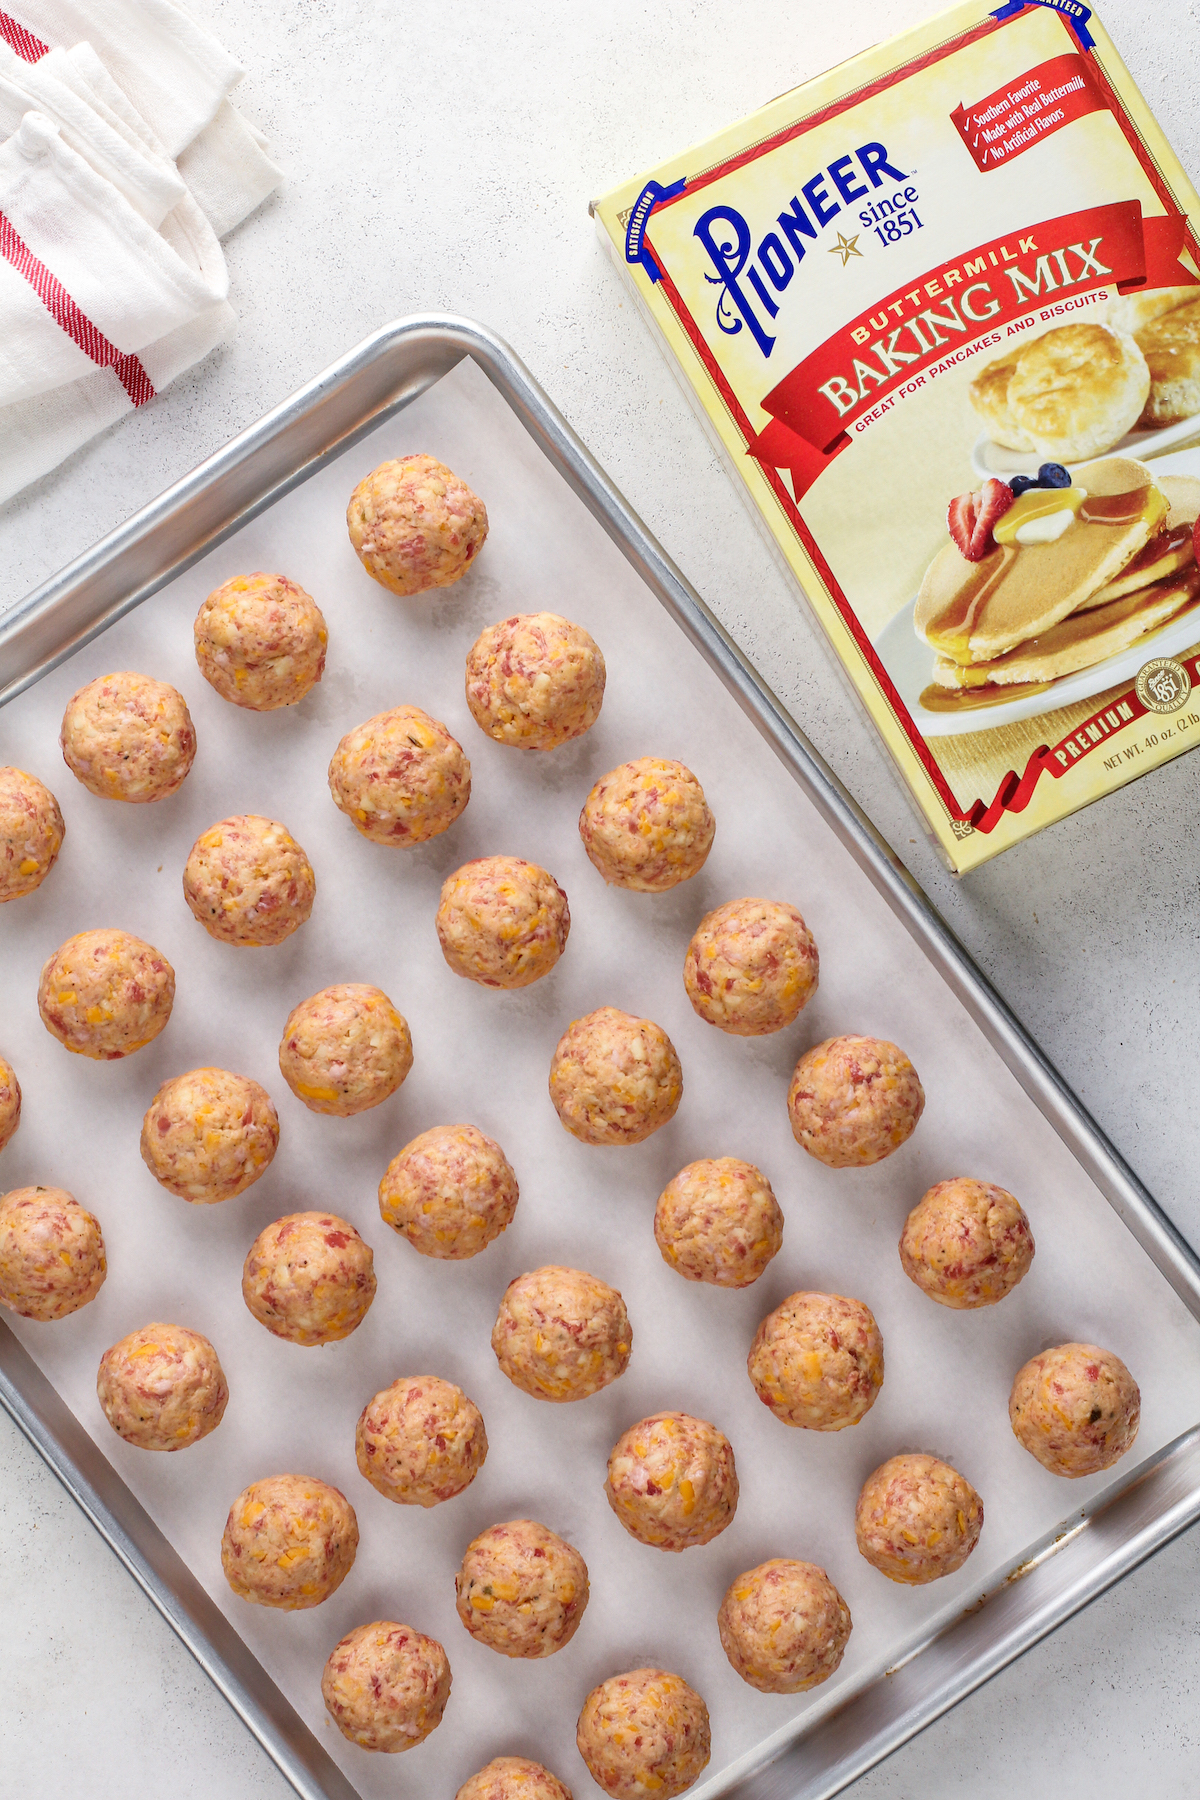 Unbaked sausage balls on a cookie sheet lined with parchment paper.